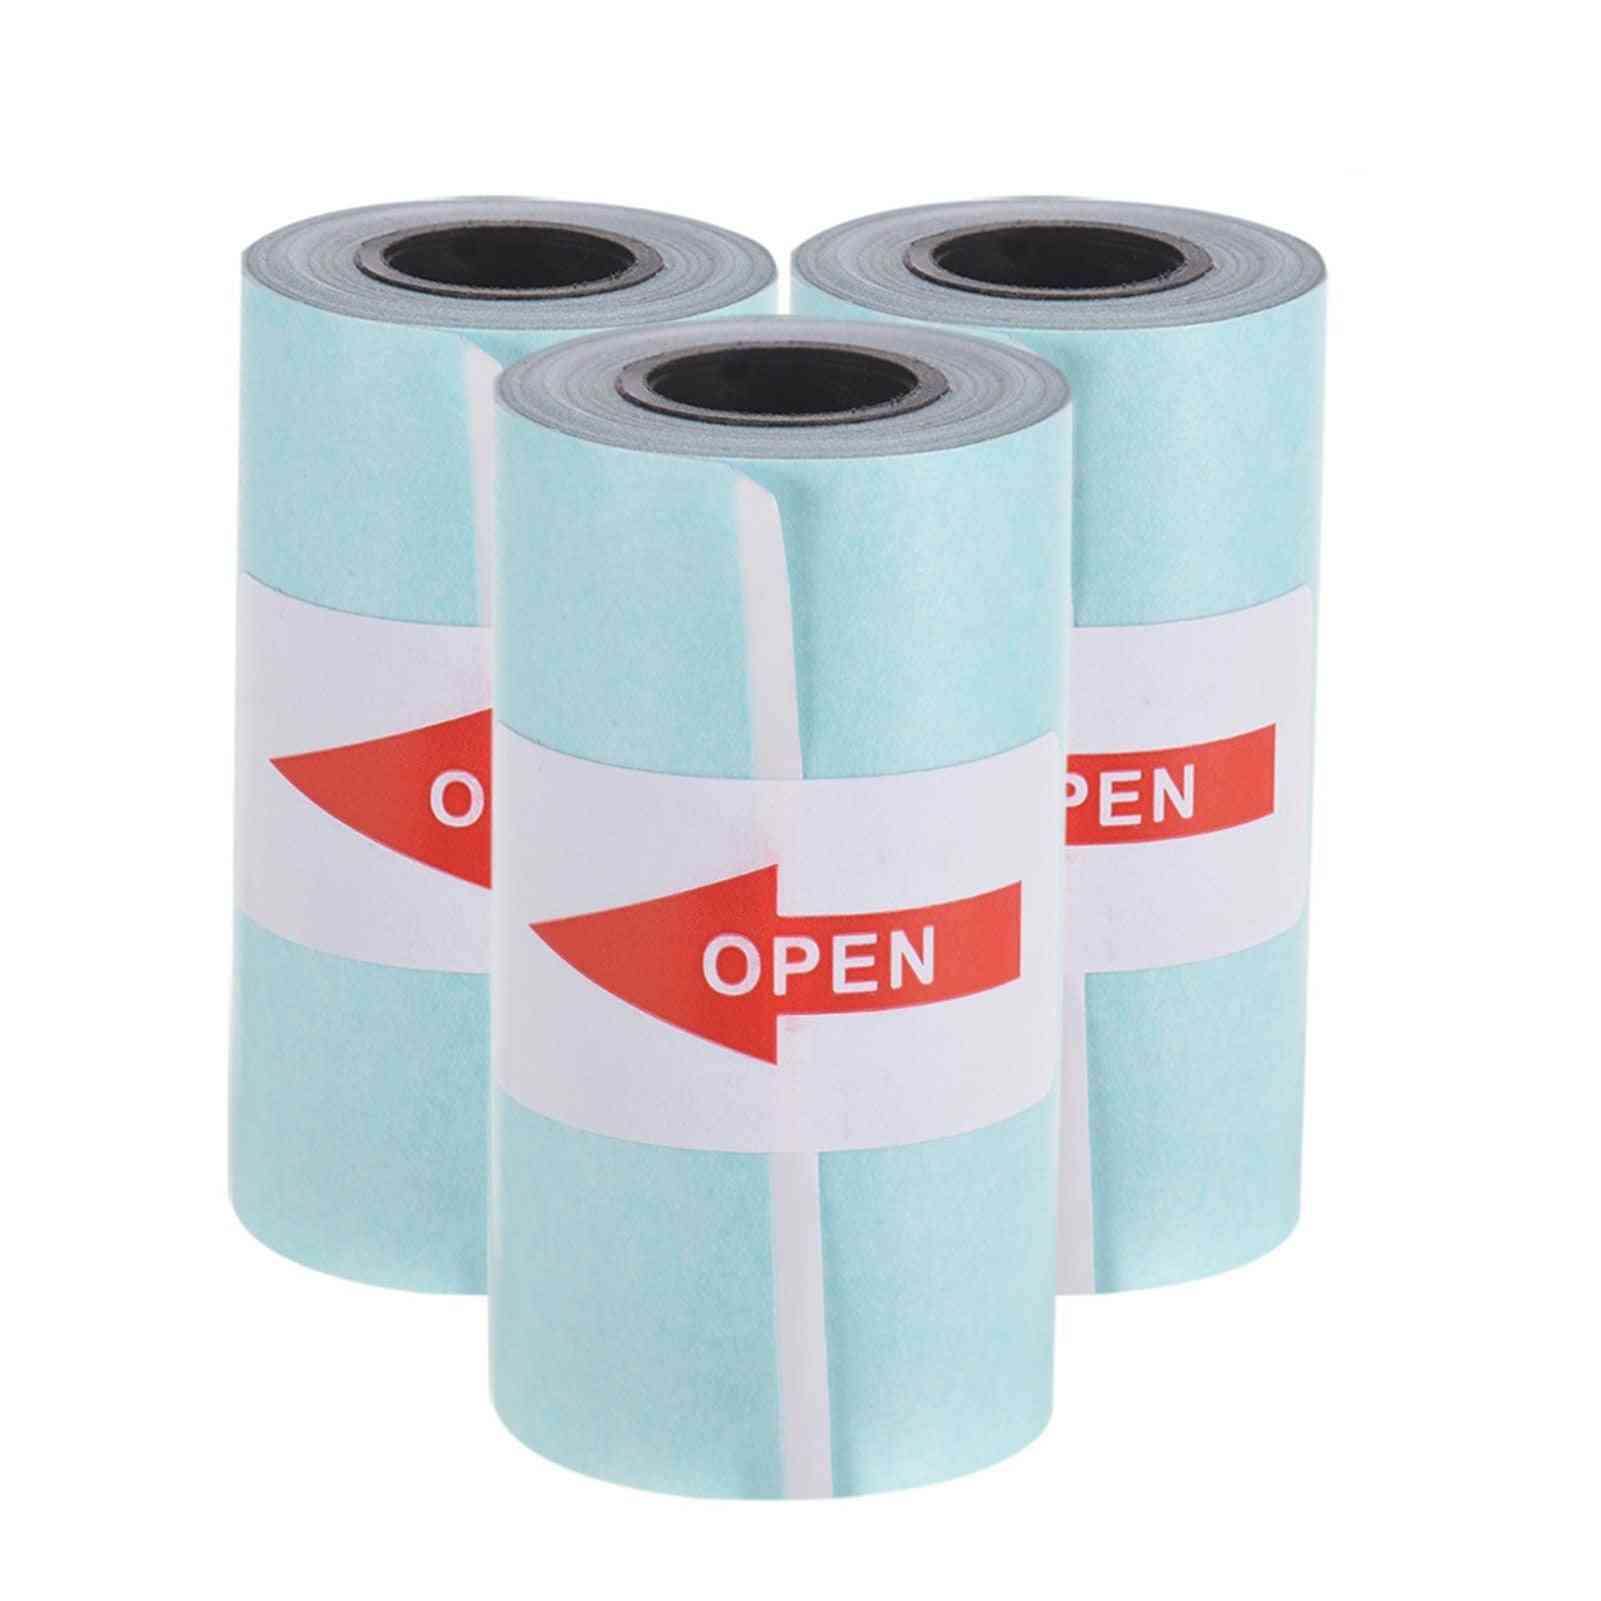 Printable Sticker Paper- Roll Direct Thermal Paper With Self-adhesive